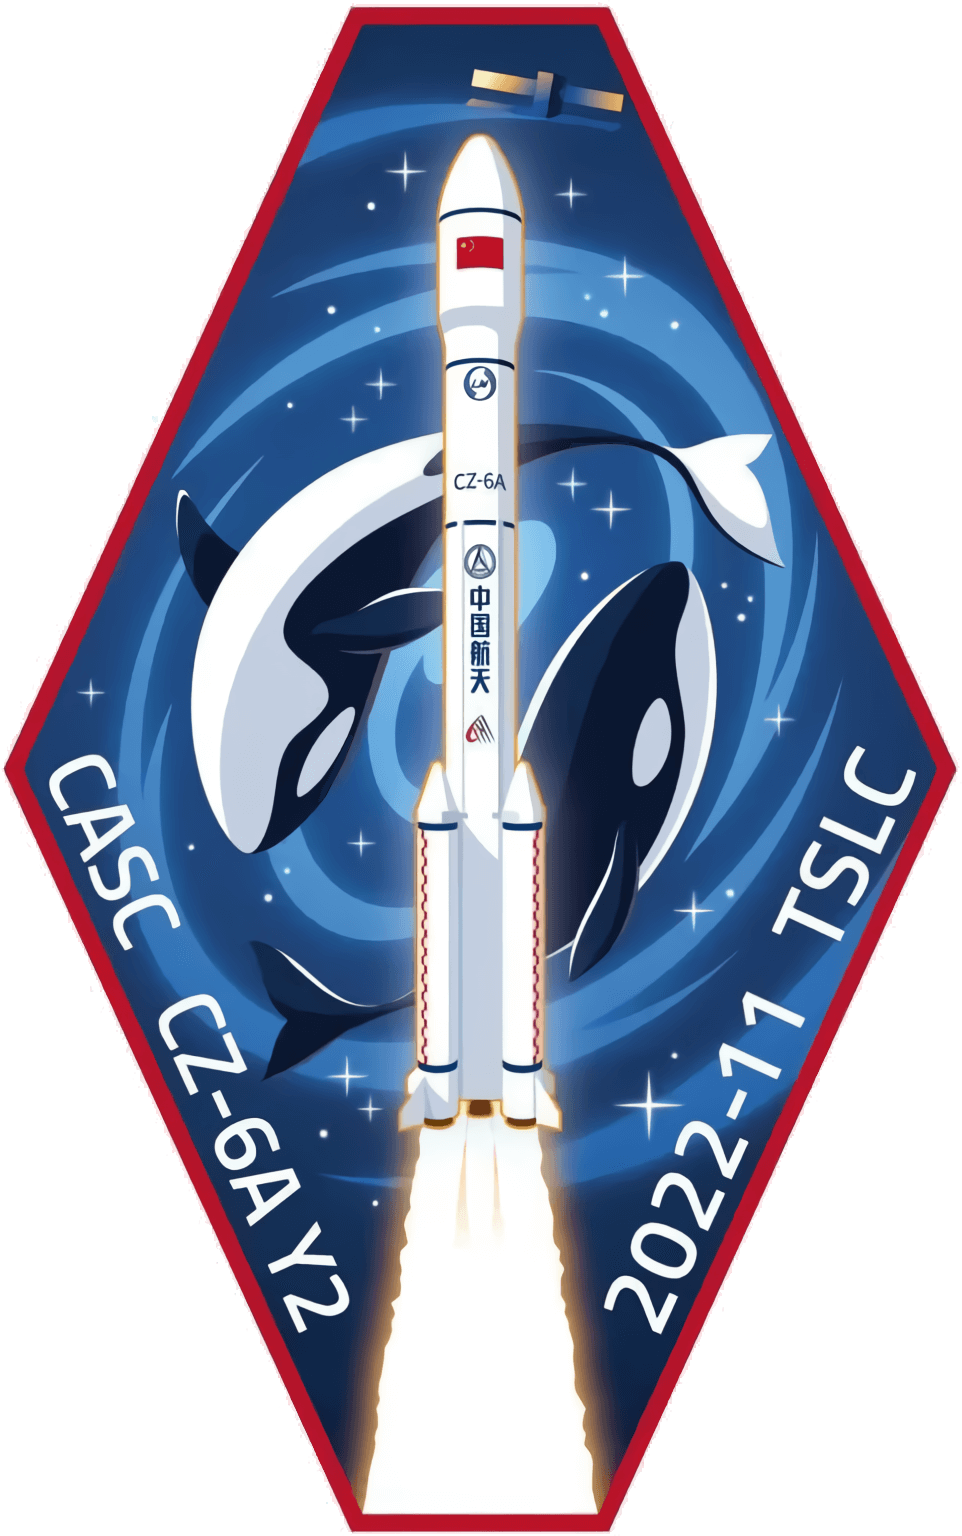 Mission patch for Yunhai 3